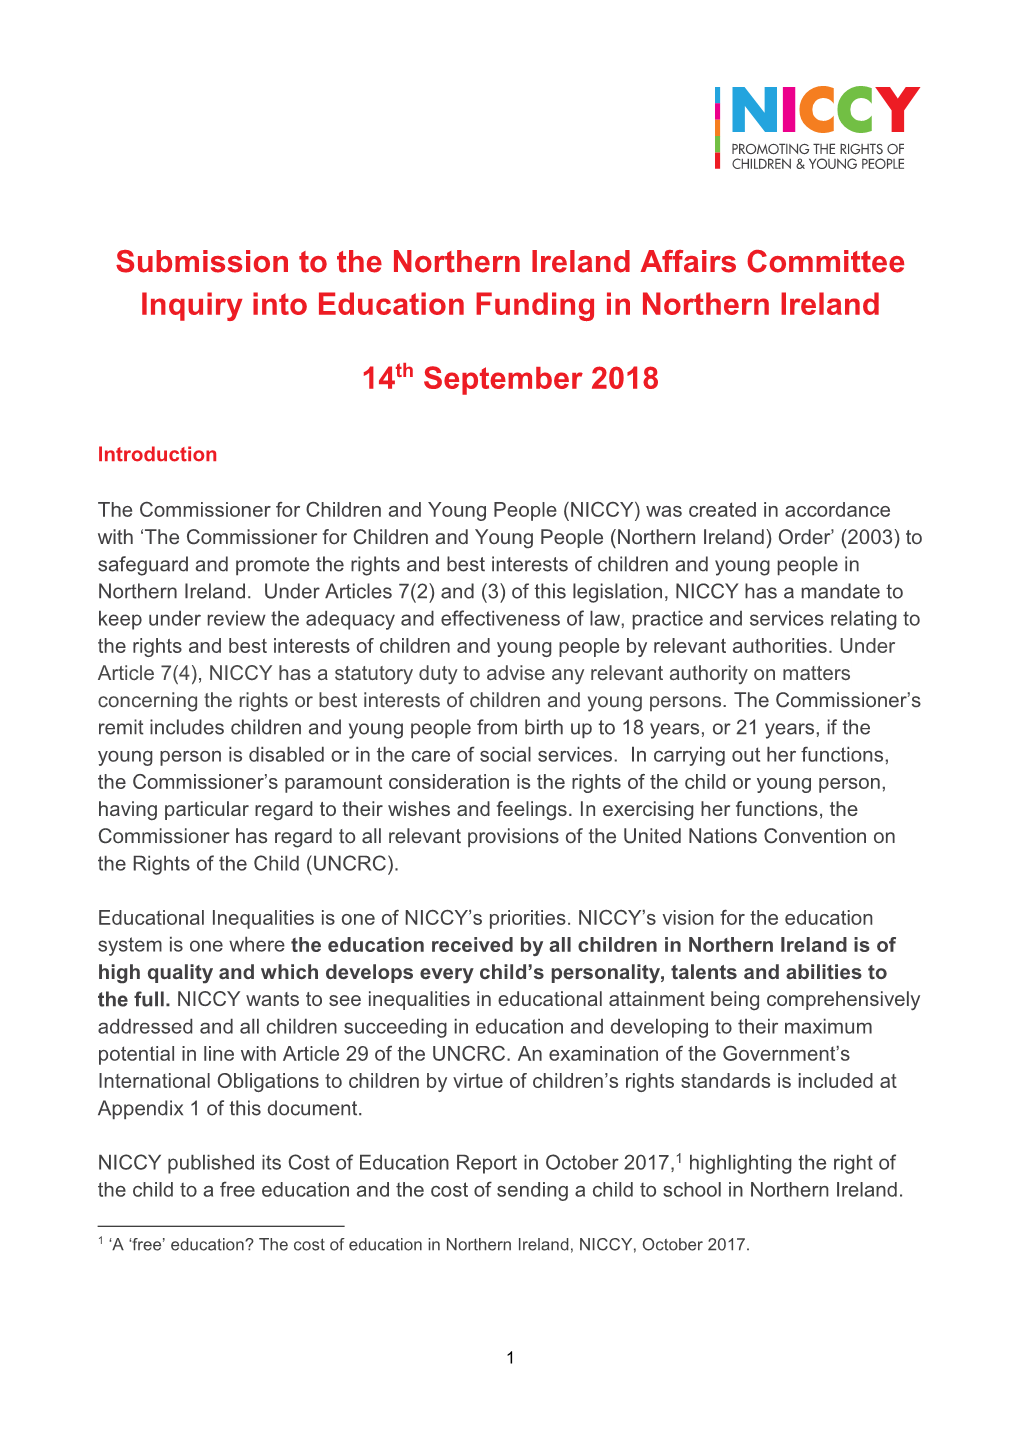 Submission to the Northern Ireland Affairs Committee Inquiry Into Education Funding in Northern Ireland